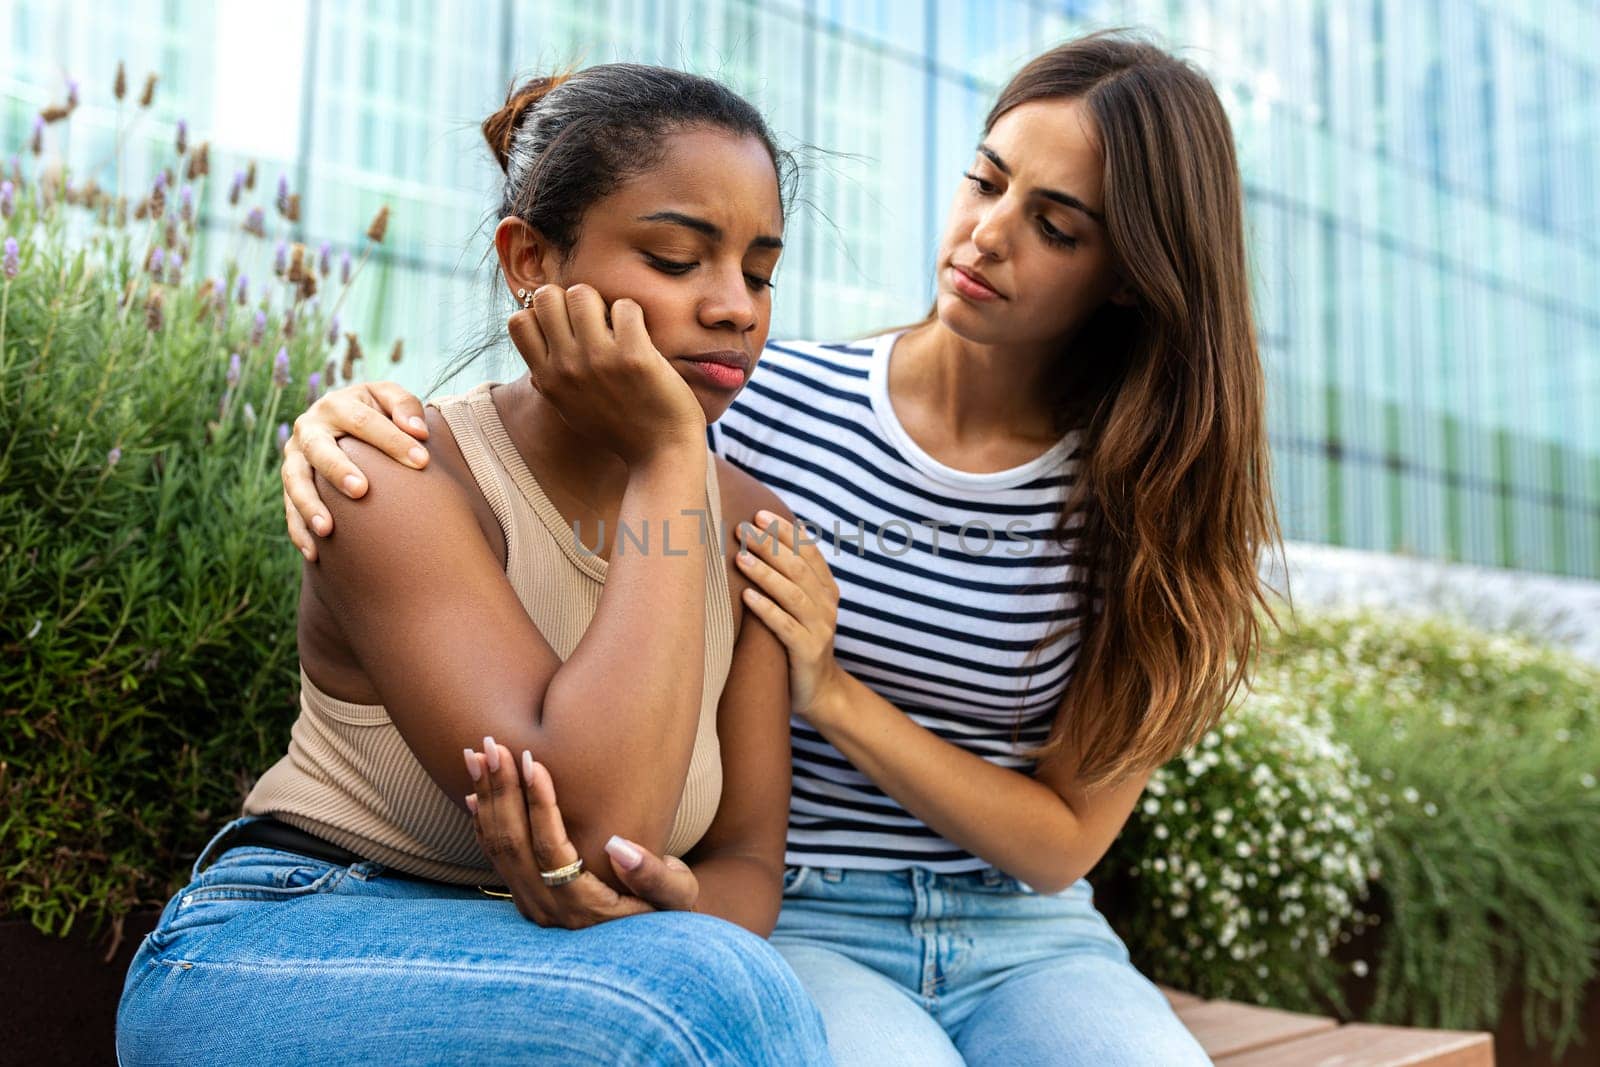 Young woman consoling and comforting upset and depressed African American female friend in park outdoors. Friendship concept.